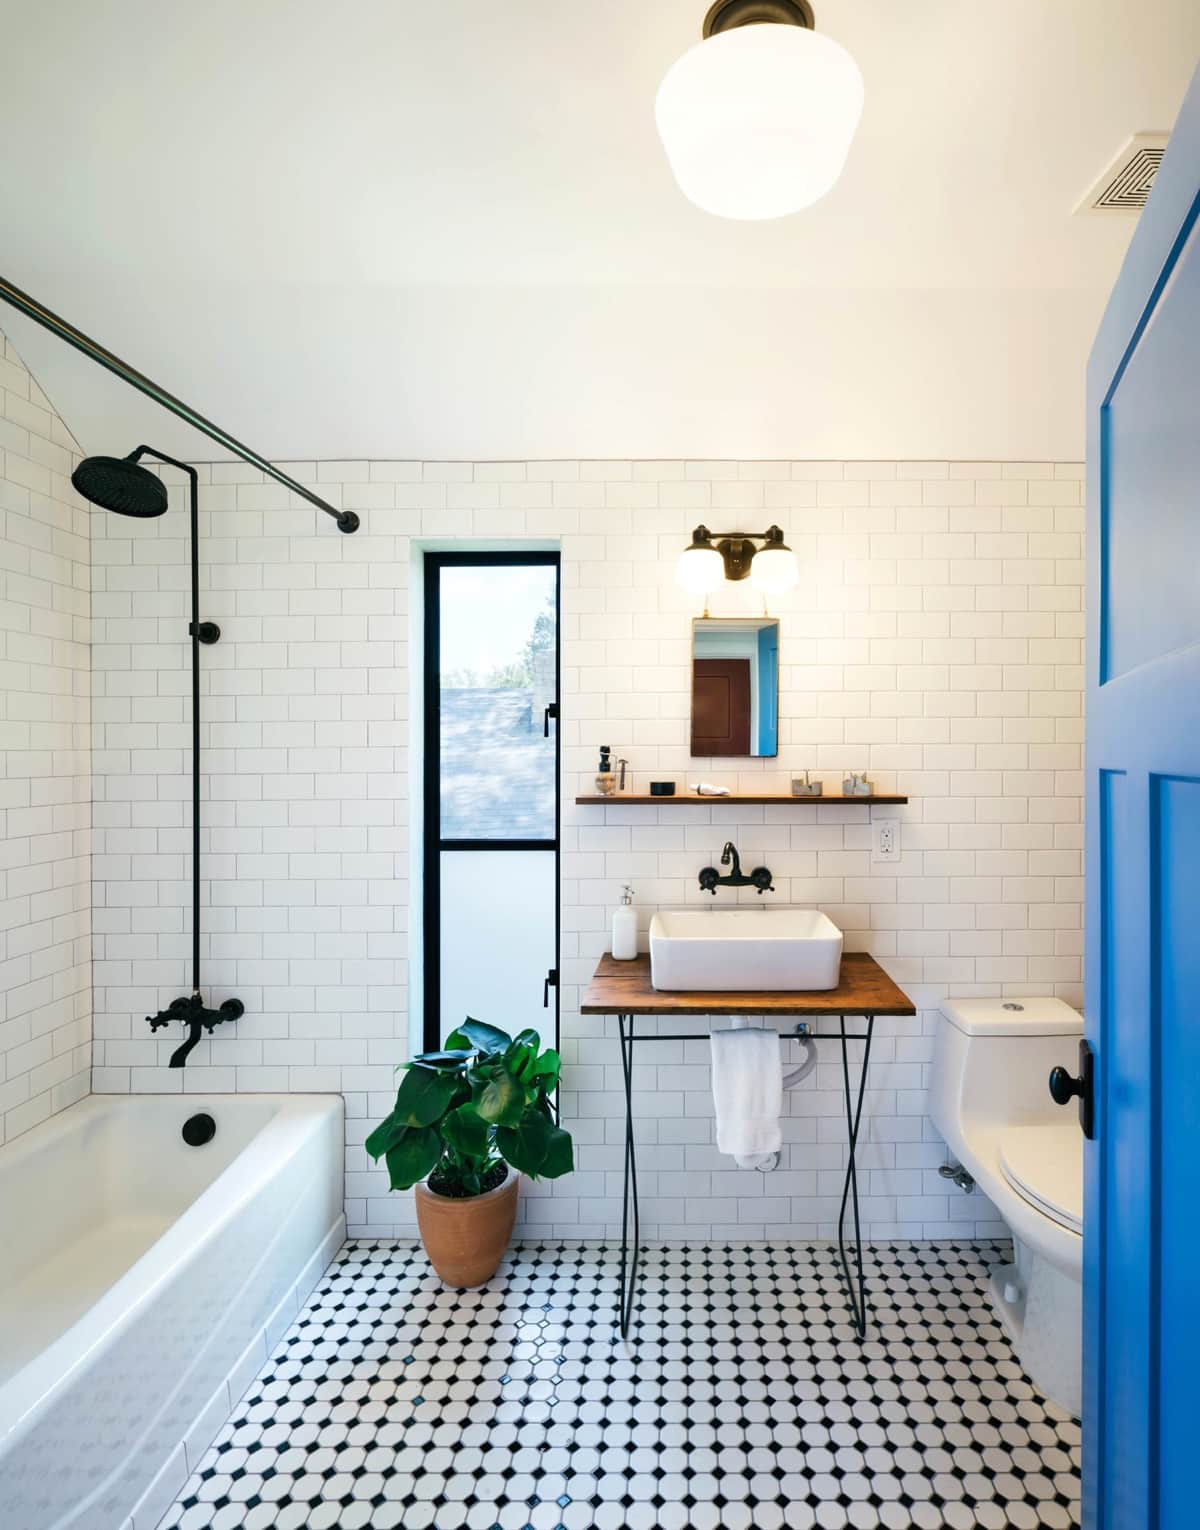 Go, Black and White industrial bathroom